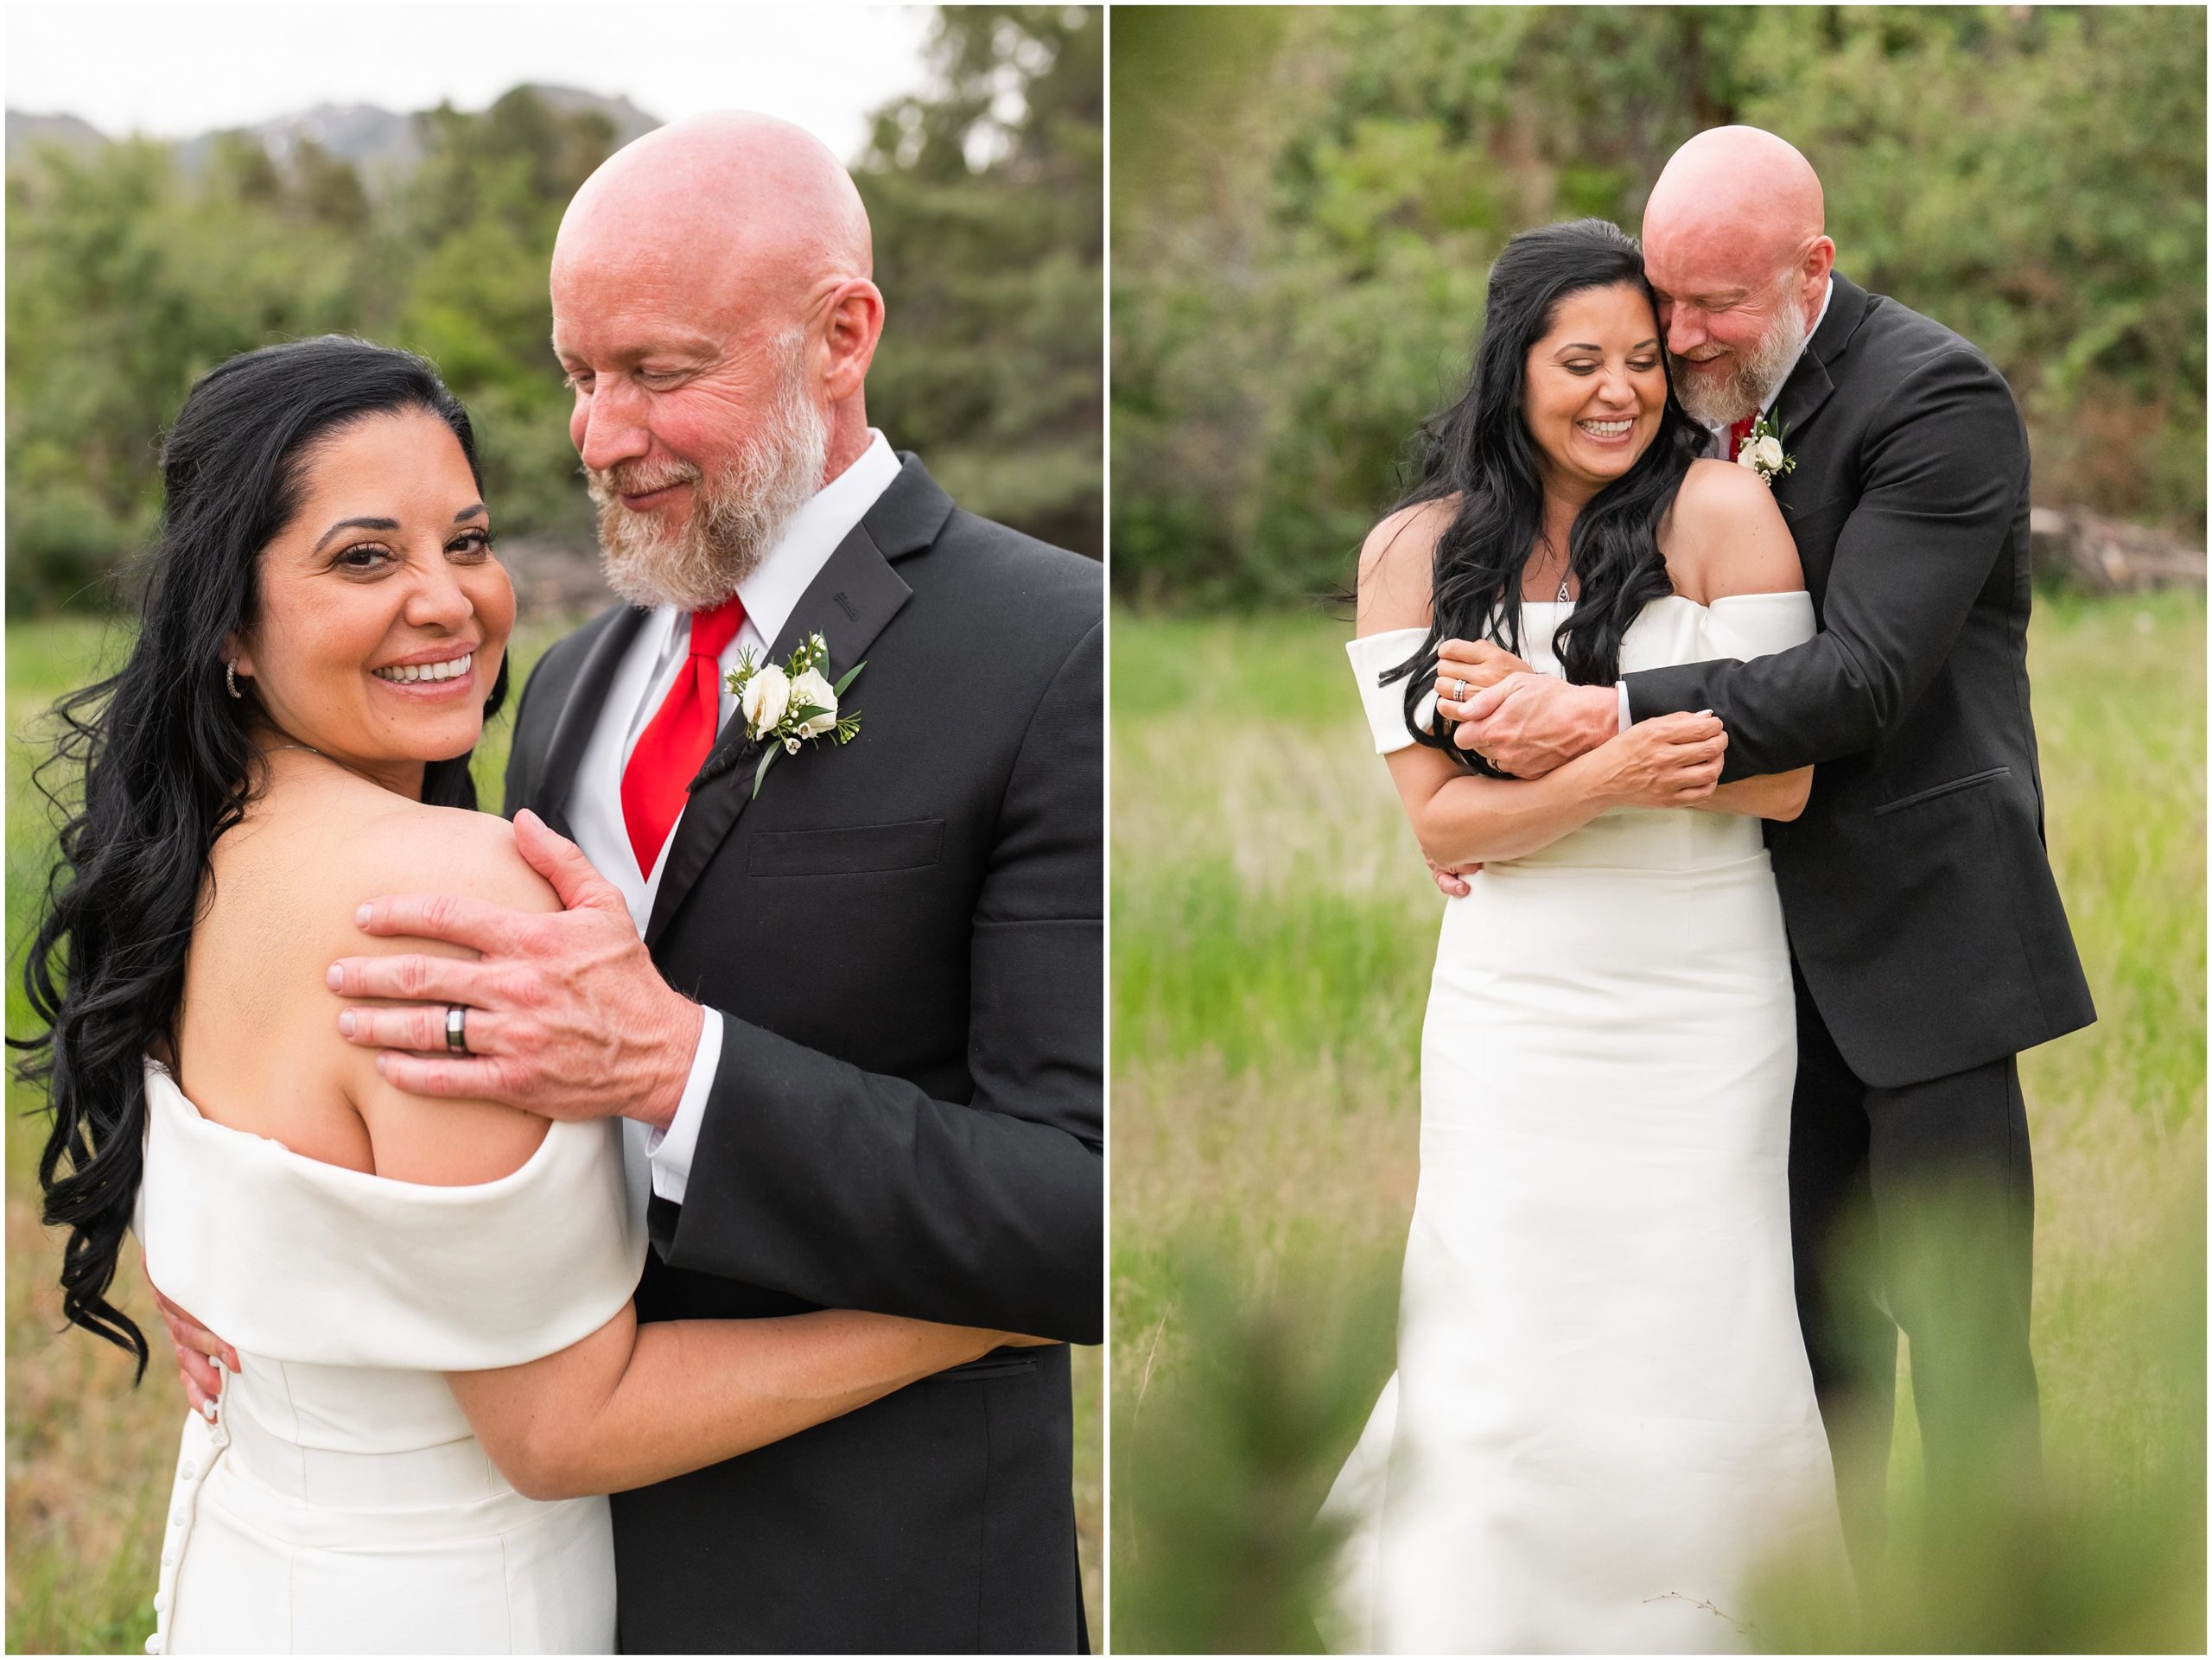 Bride and groom portraits in woods surrounded by Utah Mountains | Red and Black Oak Hills Utah Spring Wedding | Jessie and Dallin Photography